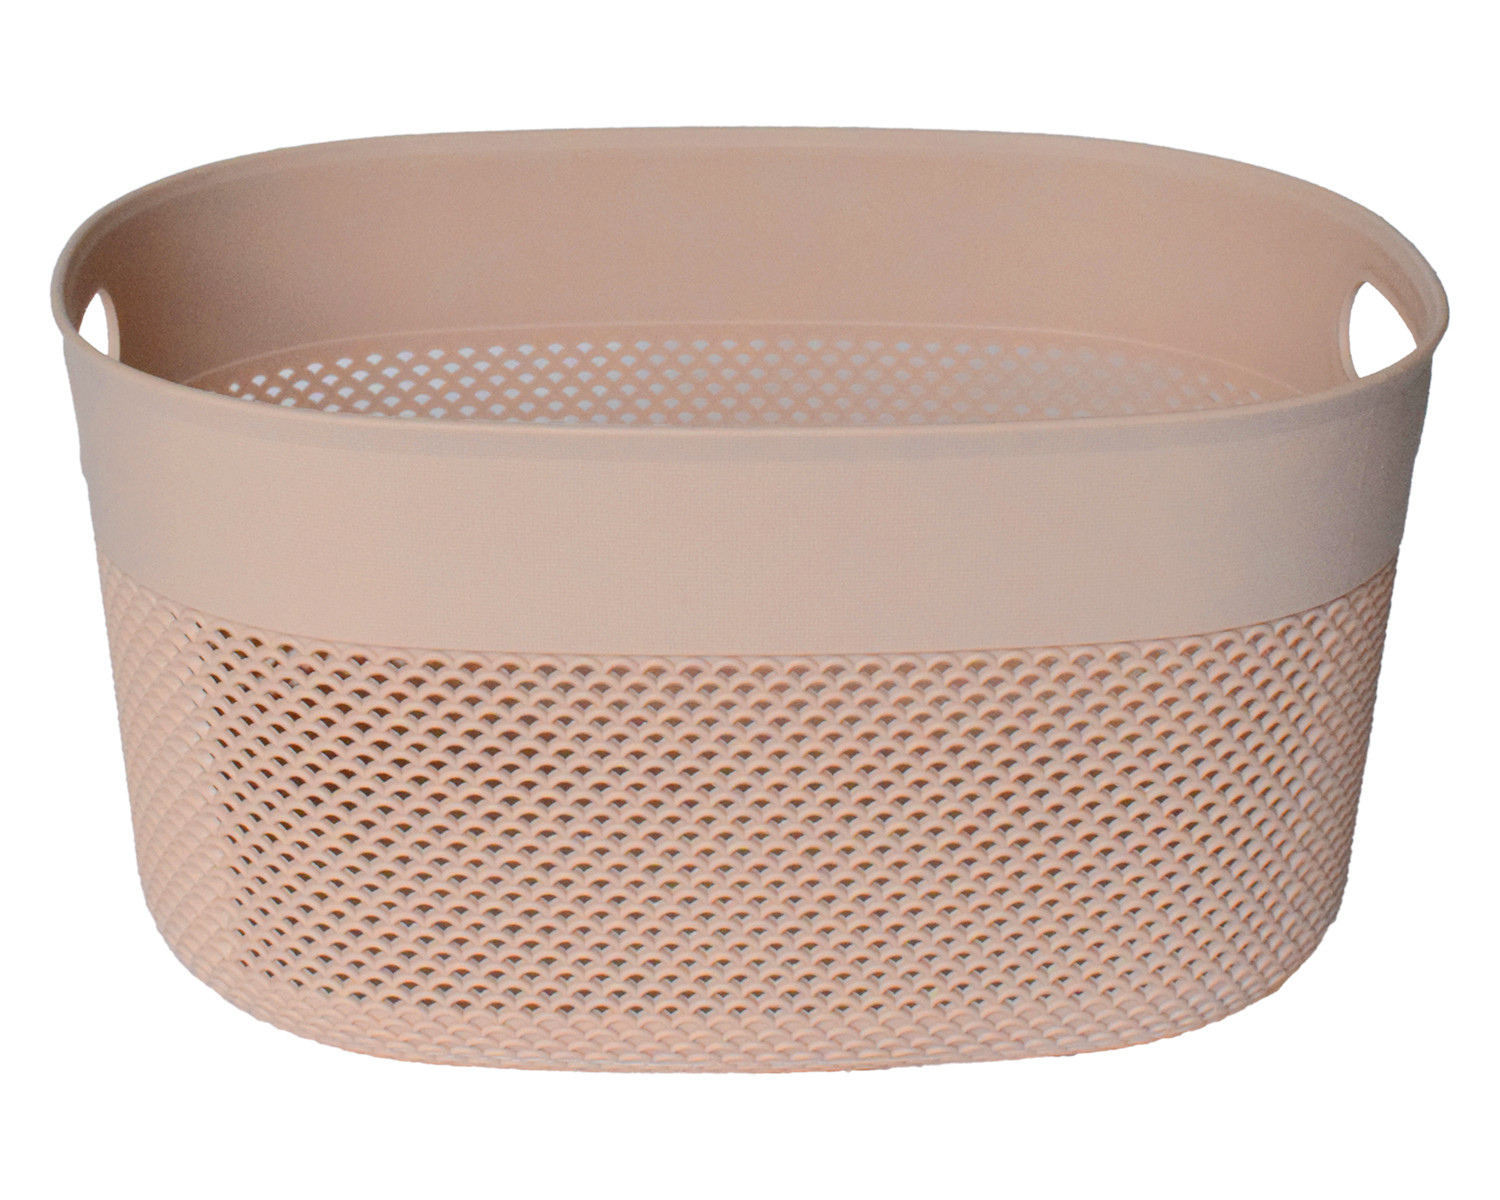 Kuber Industries Unbreakable  Medium Multipurpose Storage Baskets with lid|Design-Netted|Material-Plastic|Shape-Oval|Color-Beige